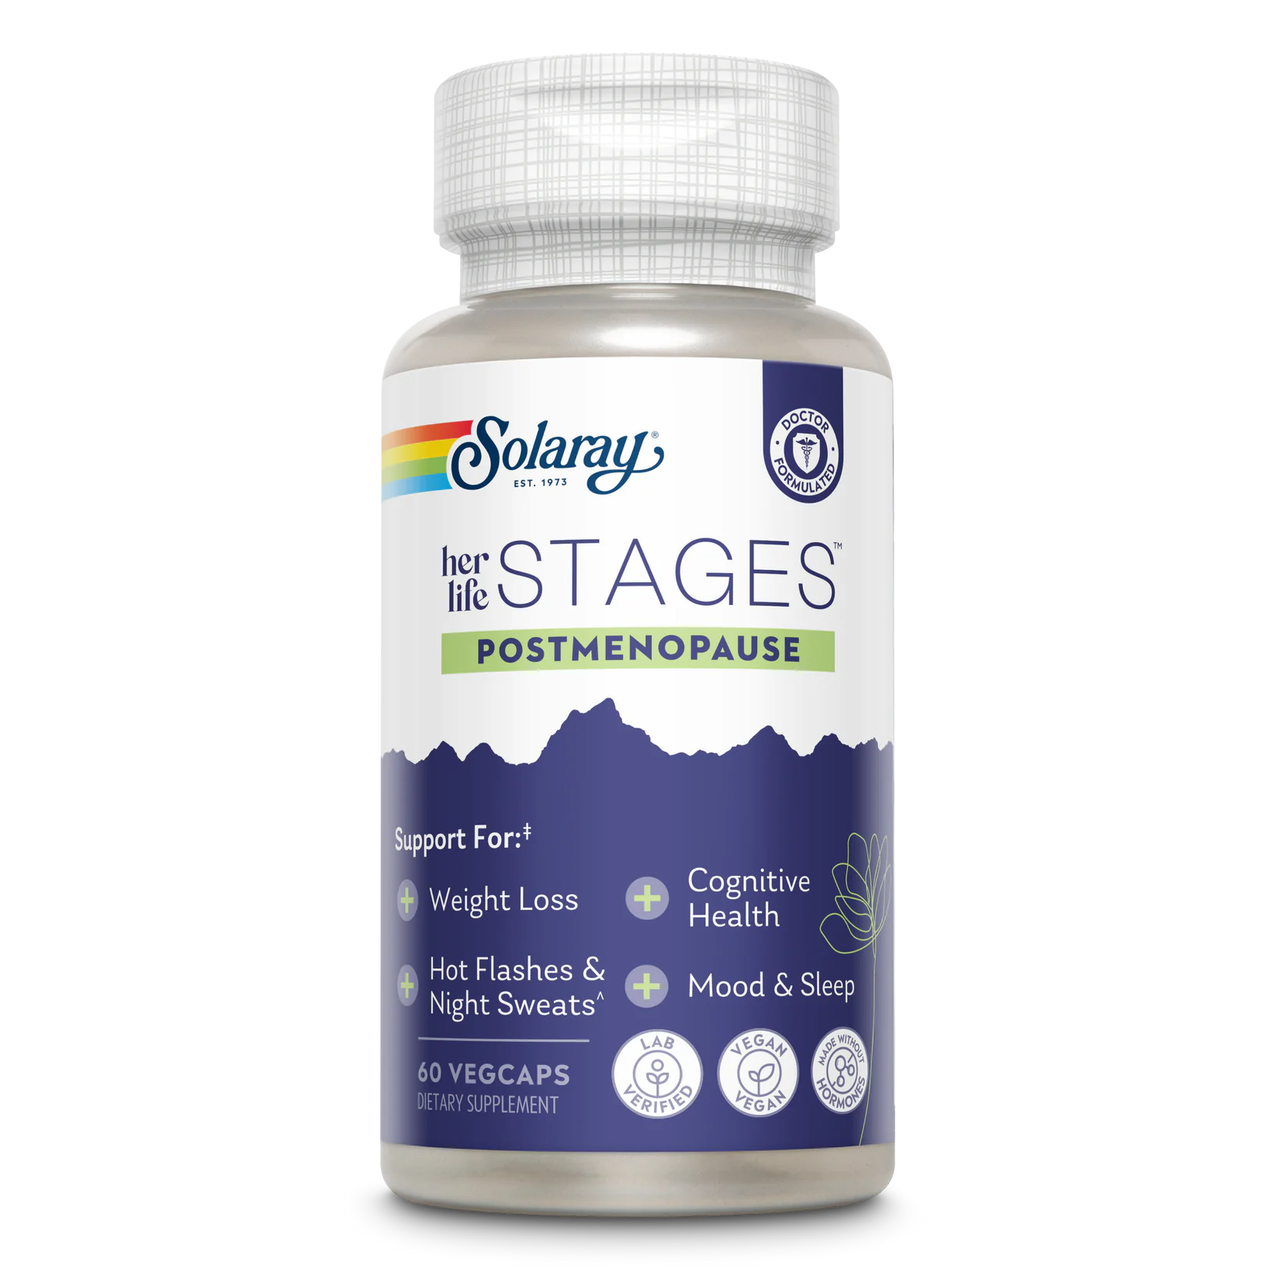 Her Life Stages Postmenopause - Solaray